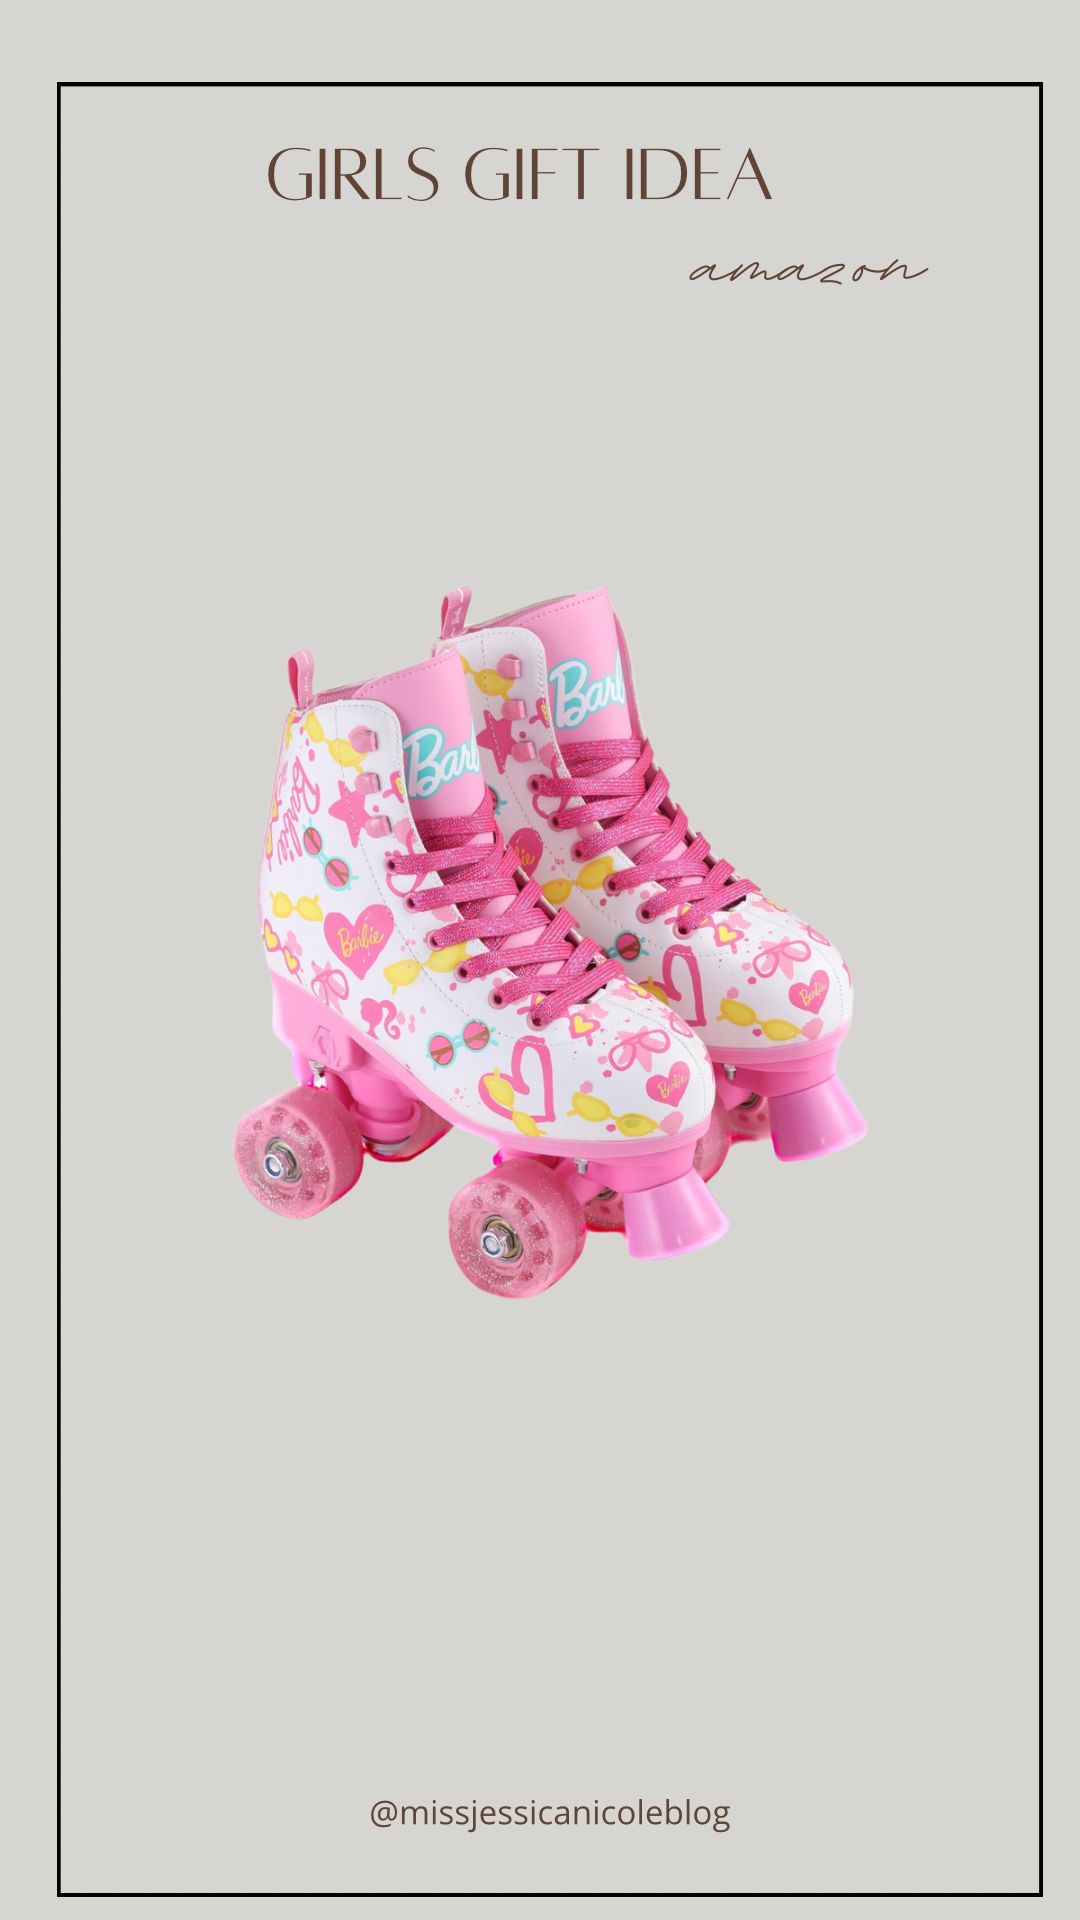 BARBIE Roller Skates for Girls - Adjustable Sizes, Glitter Wheels, ABEC 5 Bearings - Durable PVC Material, Foam Shoe Lining - Perfect for Active Fun and Adventures | Amazon (US)